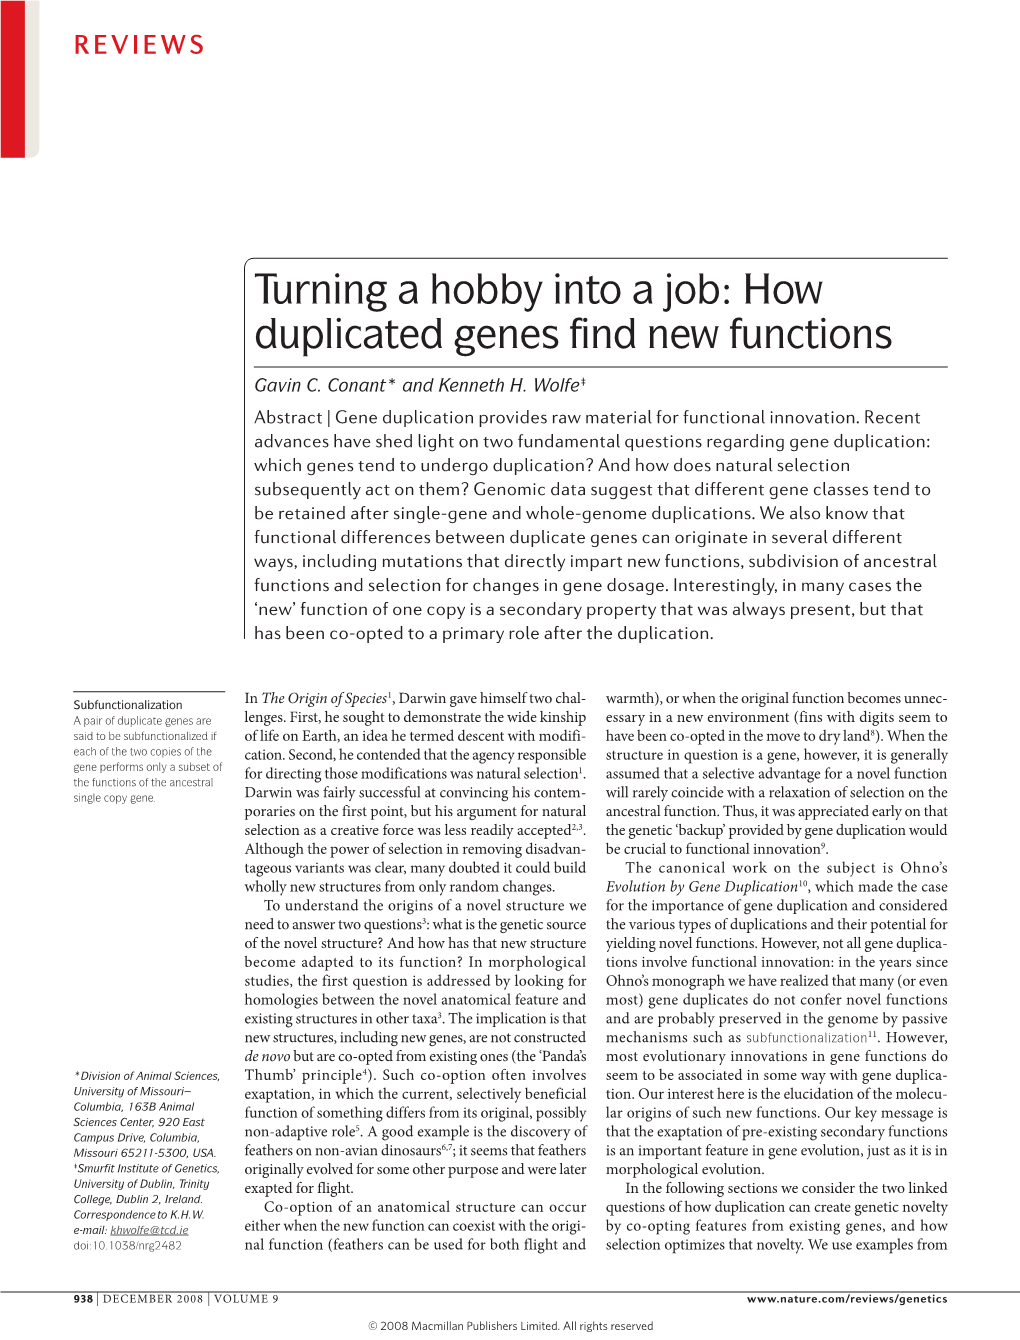 Turning a Hobby Into a Job: How Duplicated Genes Find New Functions